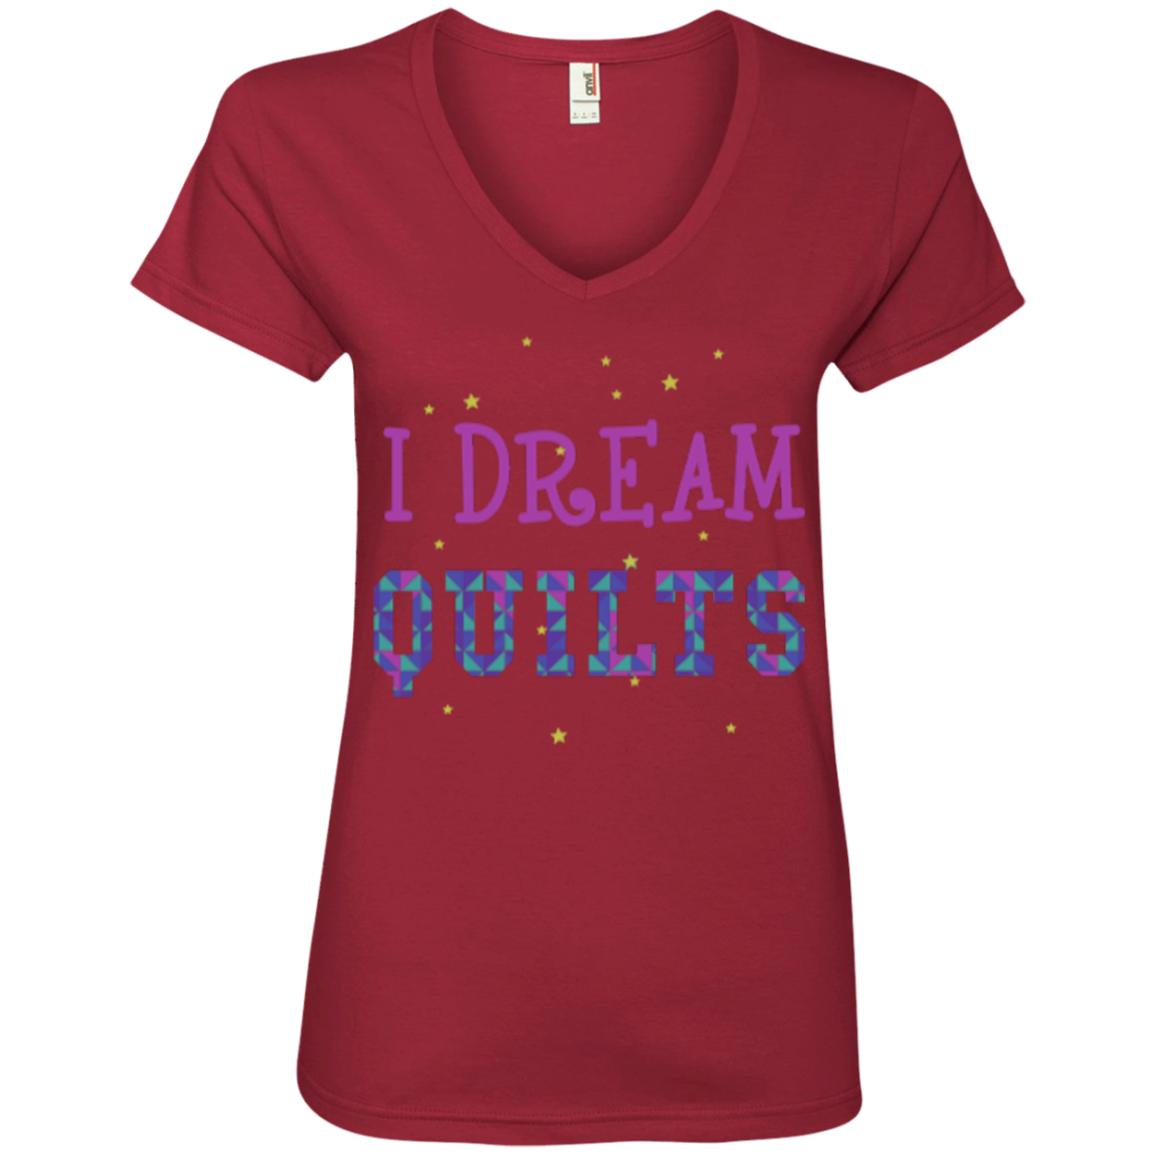 I Dream Quilts Ladies V-neck Tee - Crafter4Life - 5